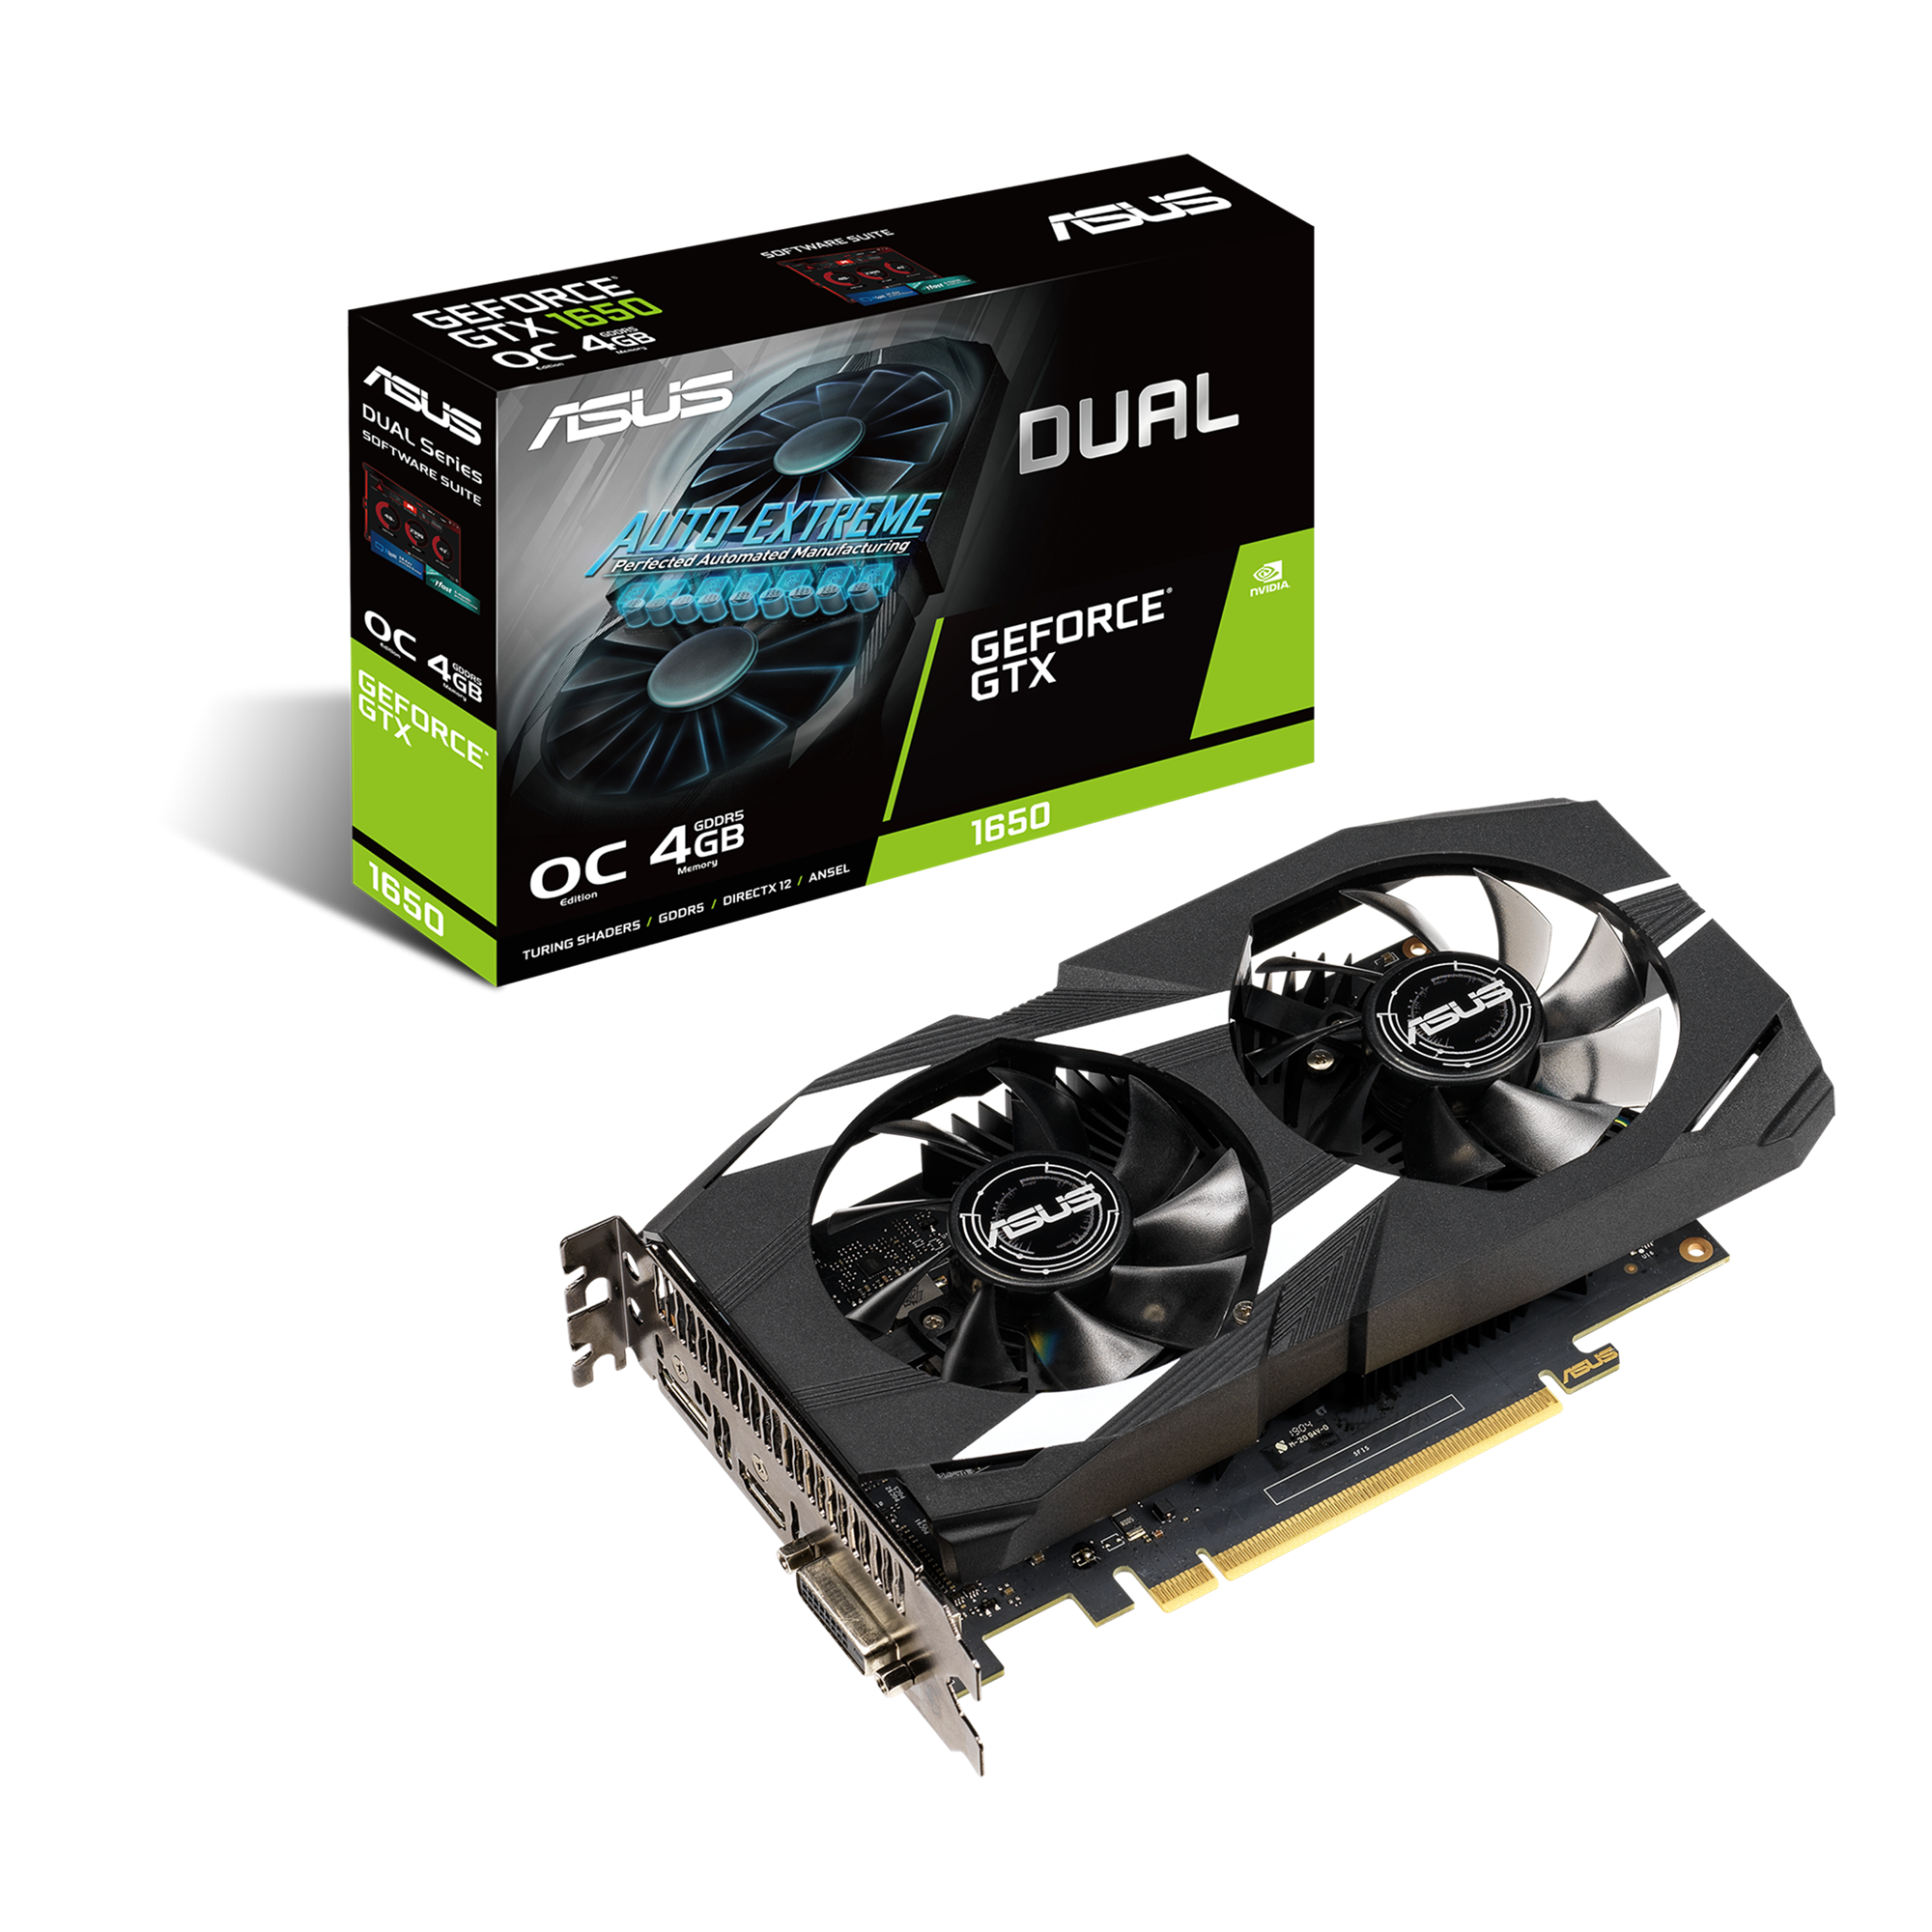 DUAL-GTX1650-O4G｜Graphics Cards｜ASUS Philippines